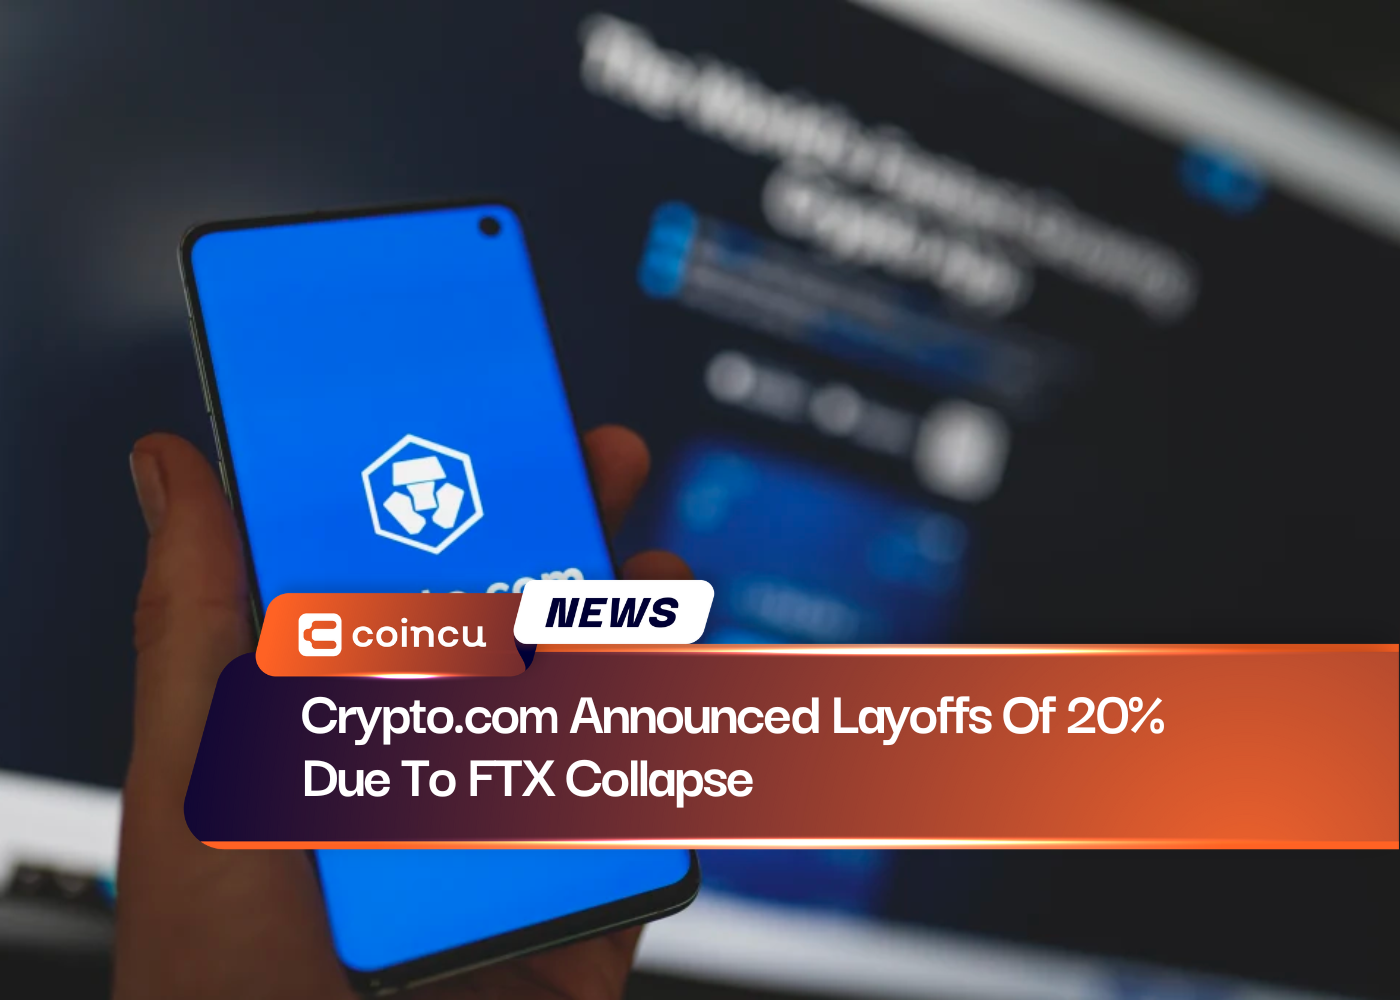 Crypto.com Announced Layoffs Of 20% Due To FTX Collapse